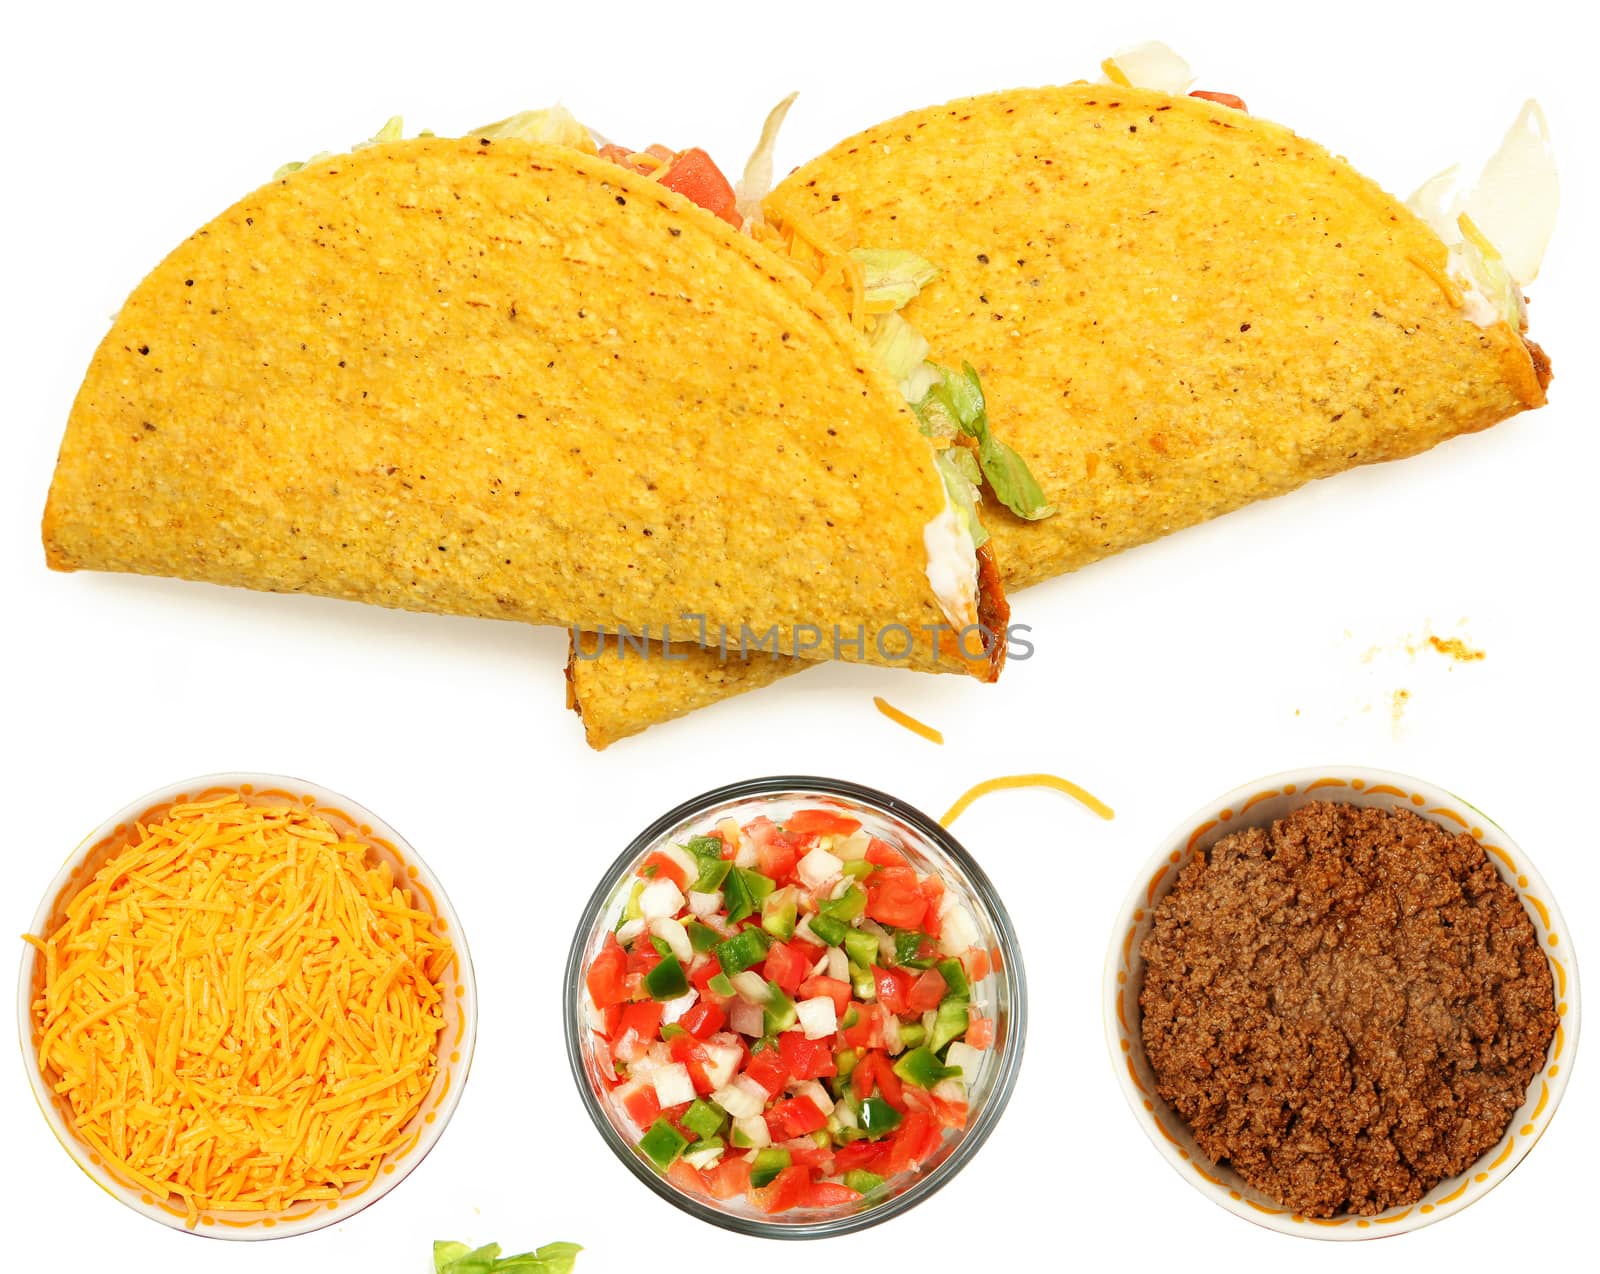 Two Tacos Stacked on White Background with cheese and lettuce. Bowl of cheese, trinity  and meat below.